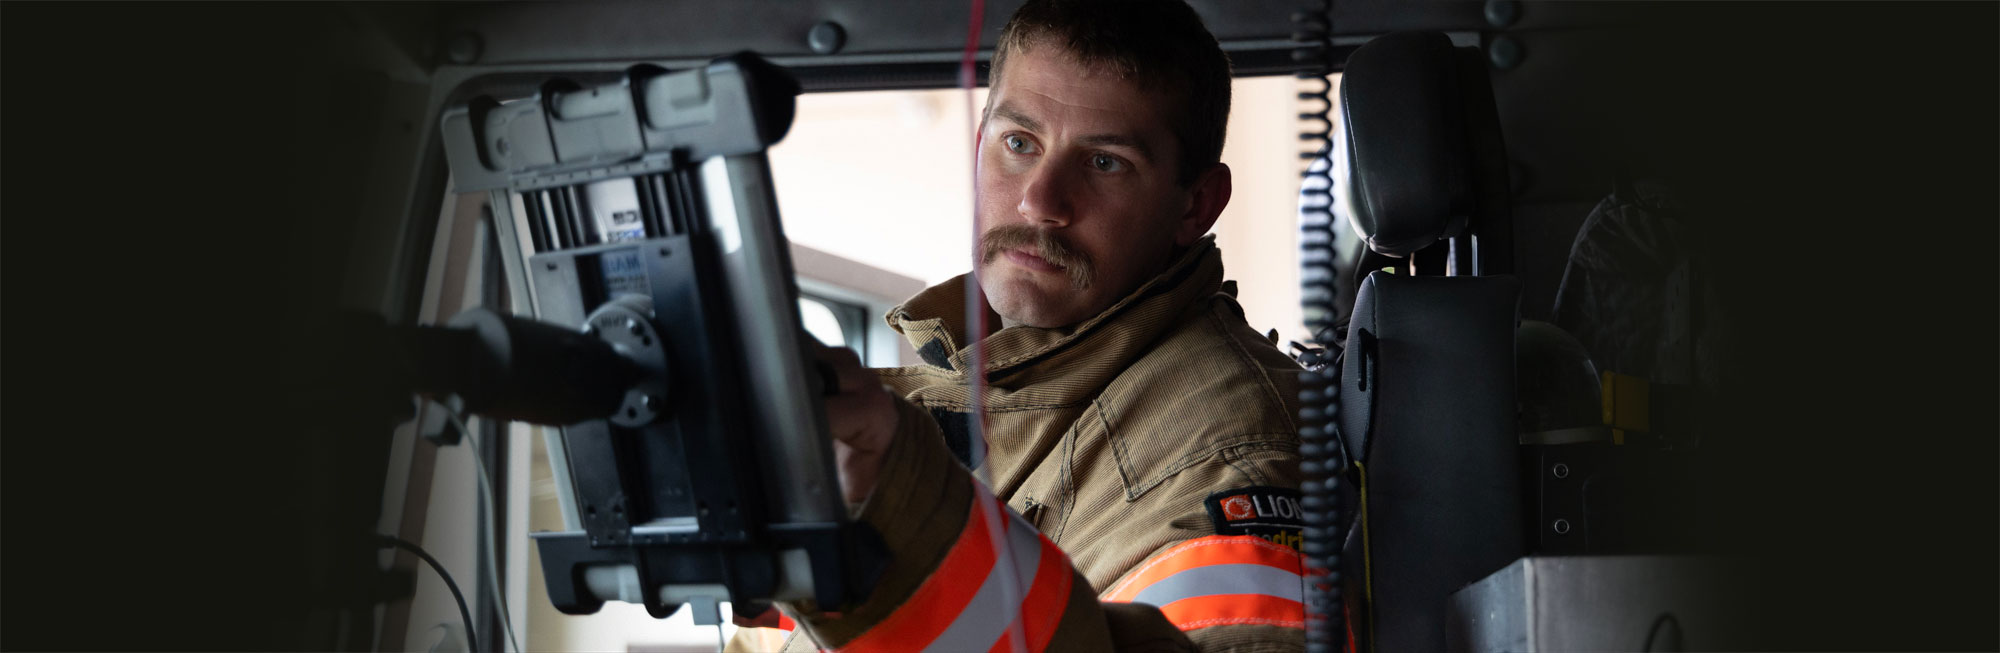 How first responders can easily incorporate technology into daily operations